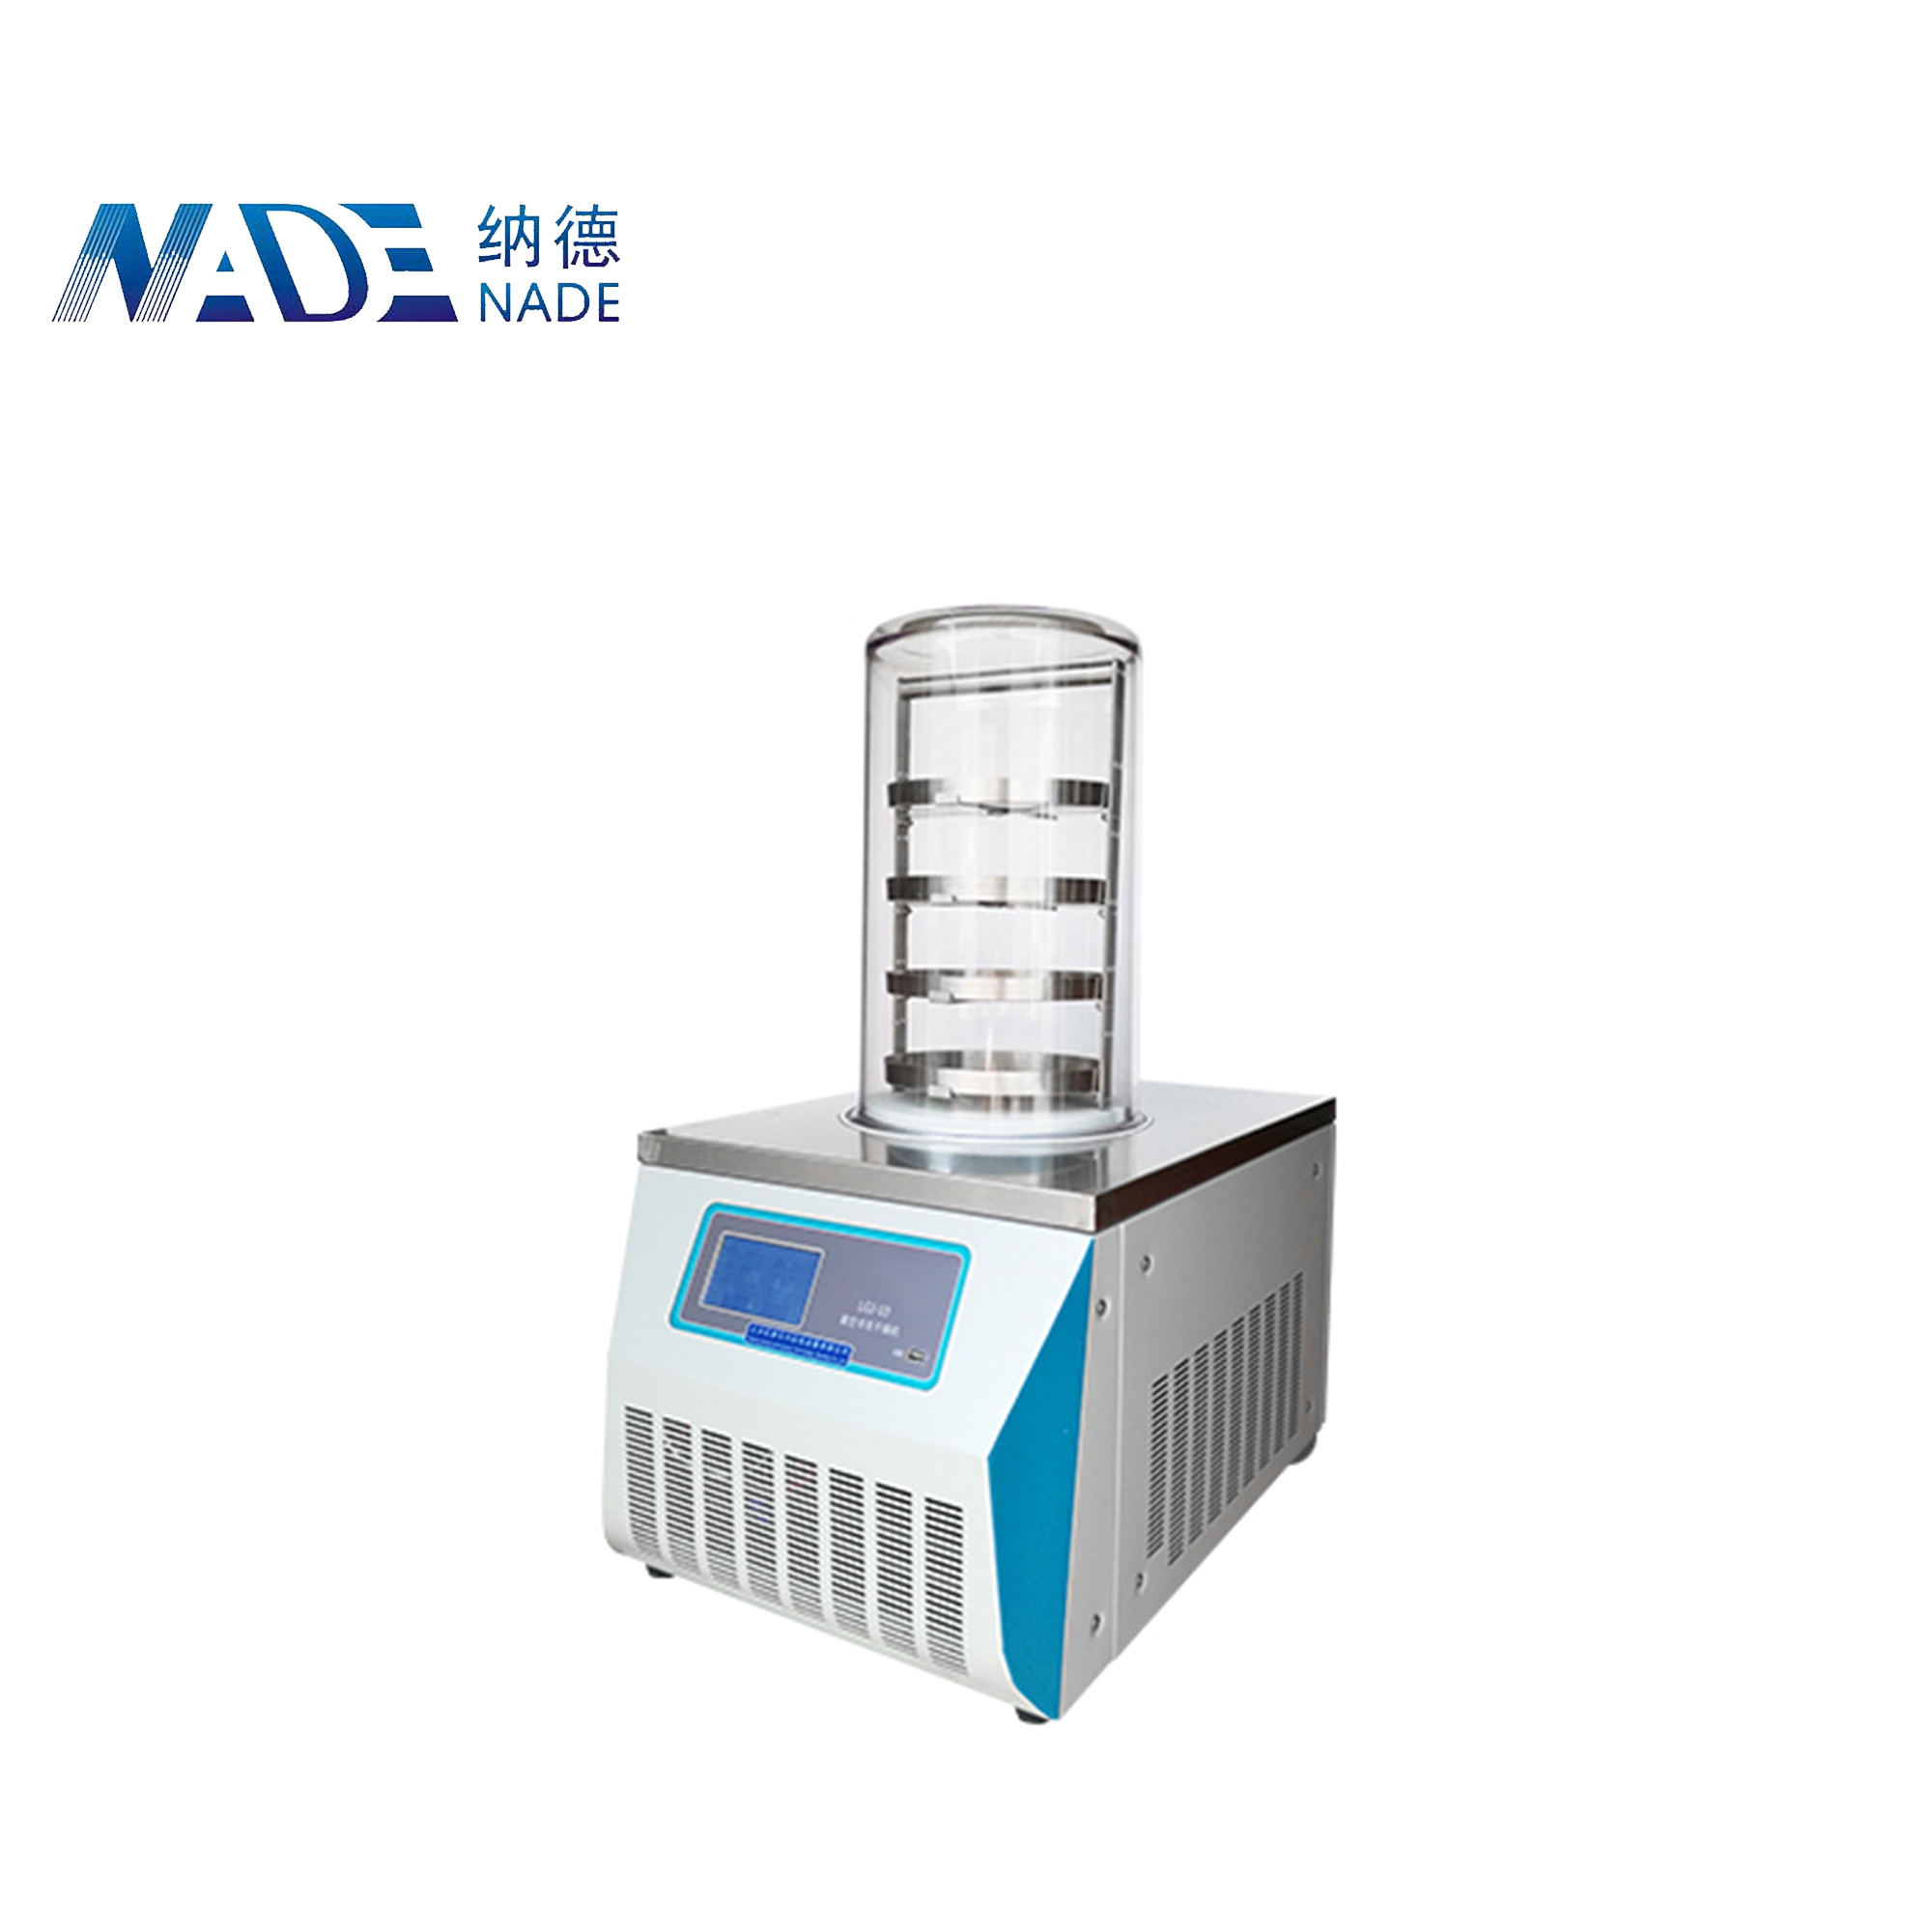 NADE LGJ-10A Standard Type Experimental Vacuum Lyophilizer/freeze drying equipment/freeze dryer for liquid, paste, solid